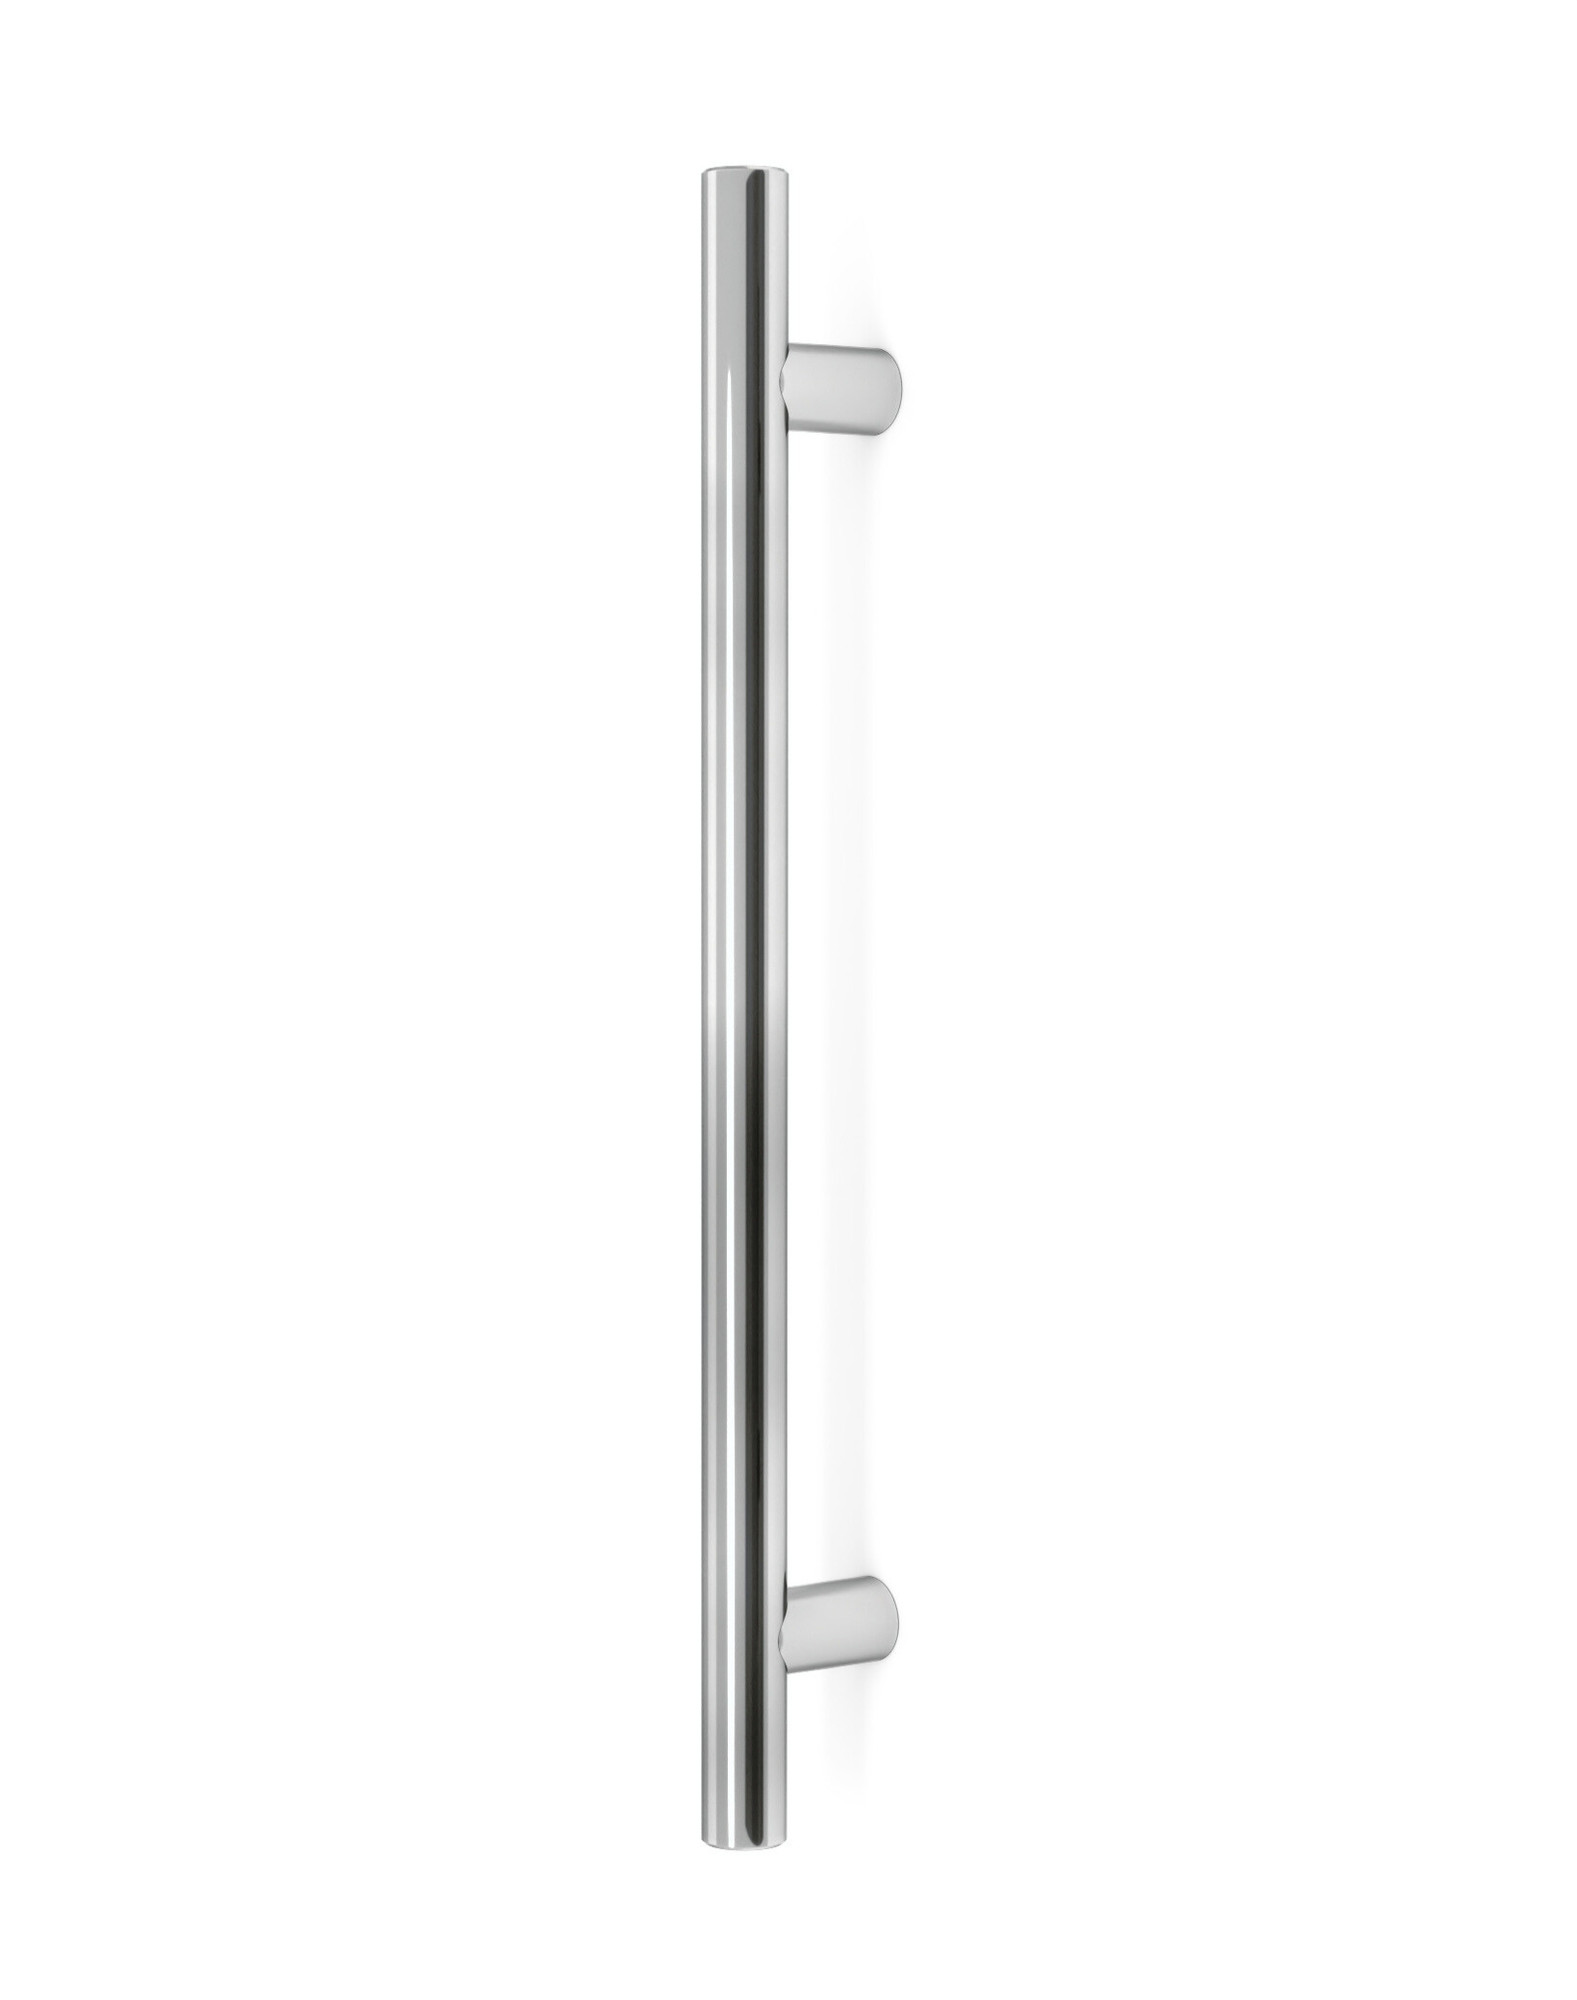 Pro-Line Series: Ladder Pull Handle - Back-to-Back, Polished US32/629 Finish, 304 Grade Stainless Steel Alloy